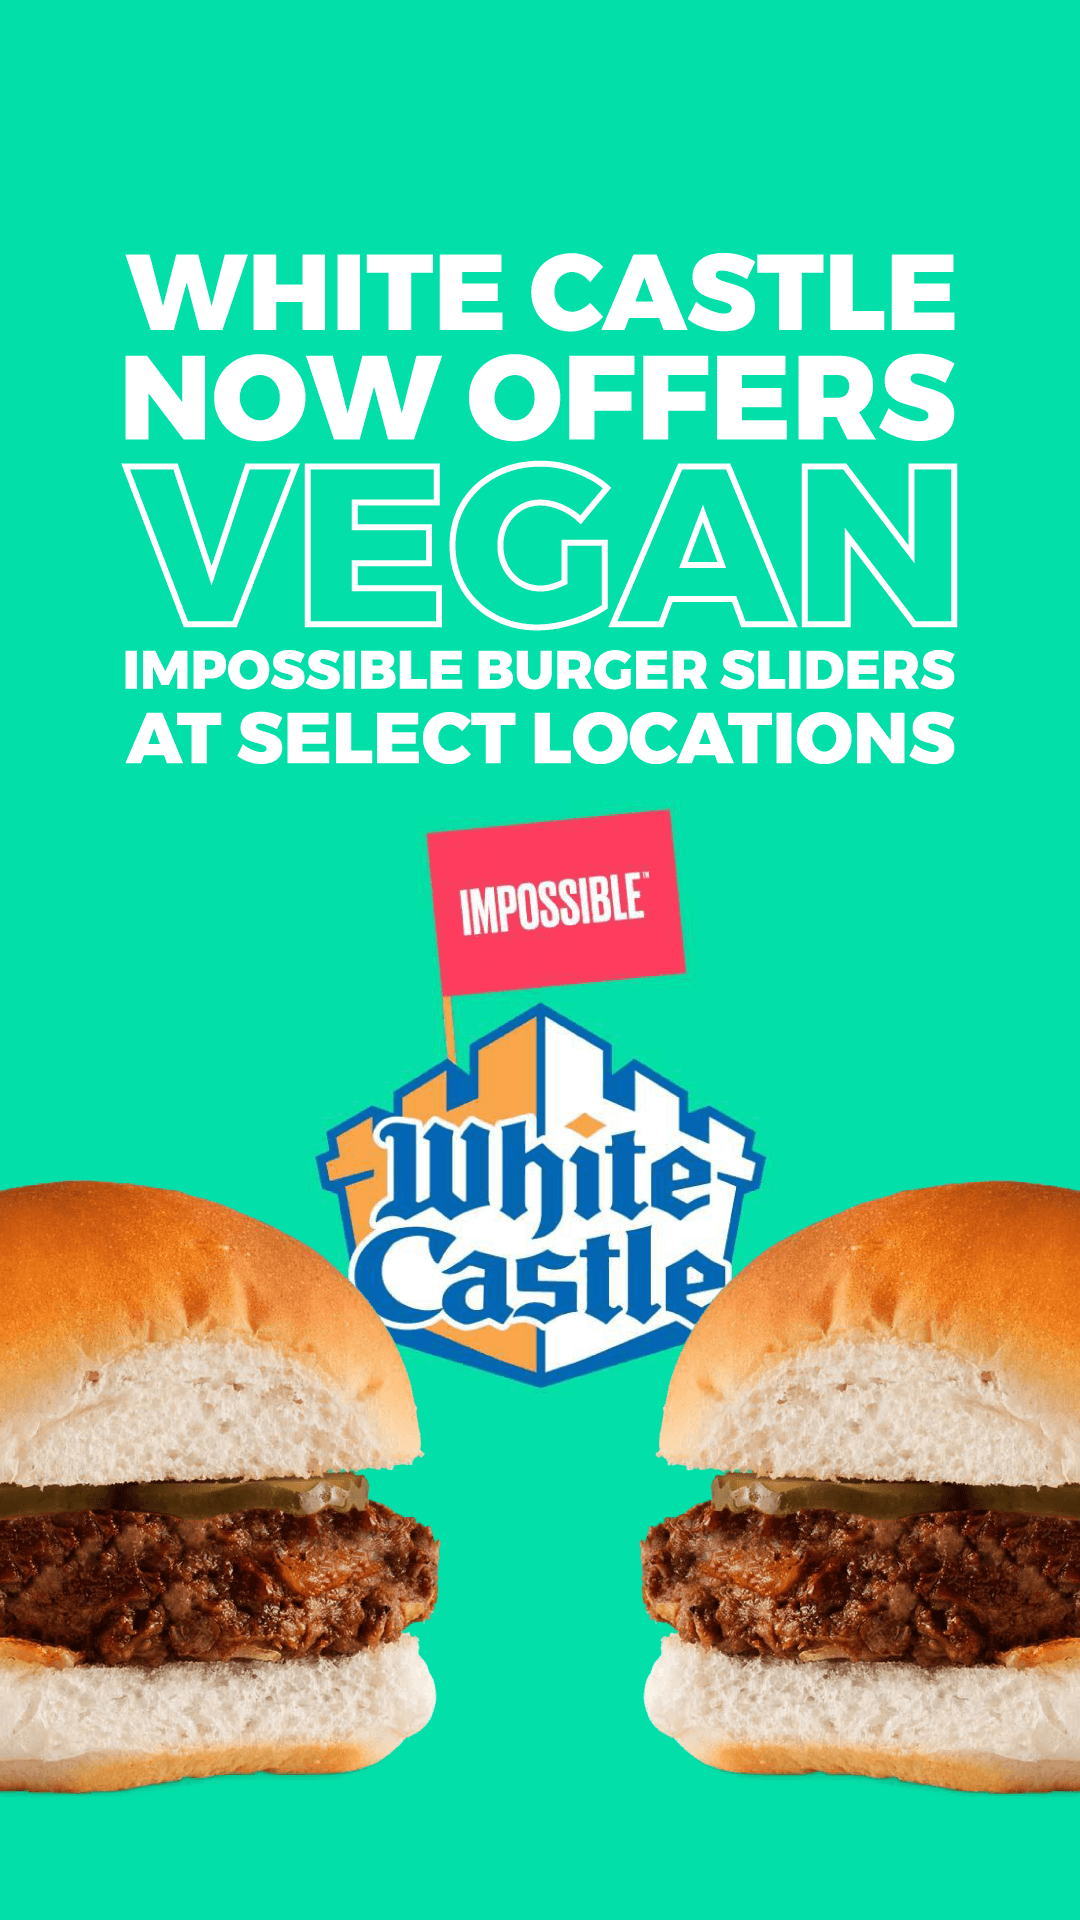 White Castle Now Offers Vegan Impossible Burger Sliders at Select Locations